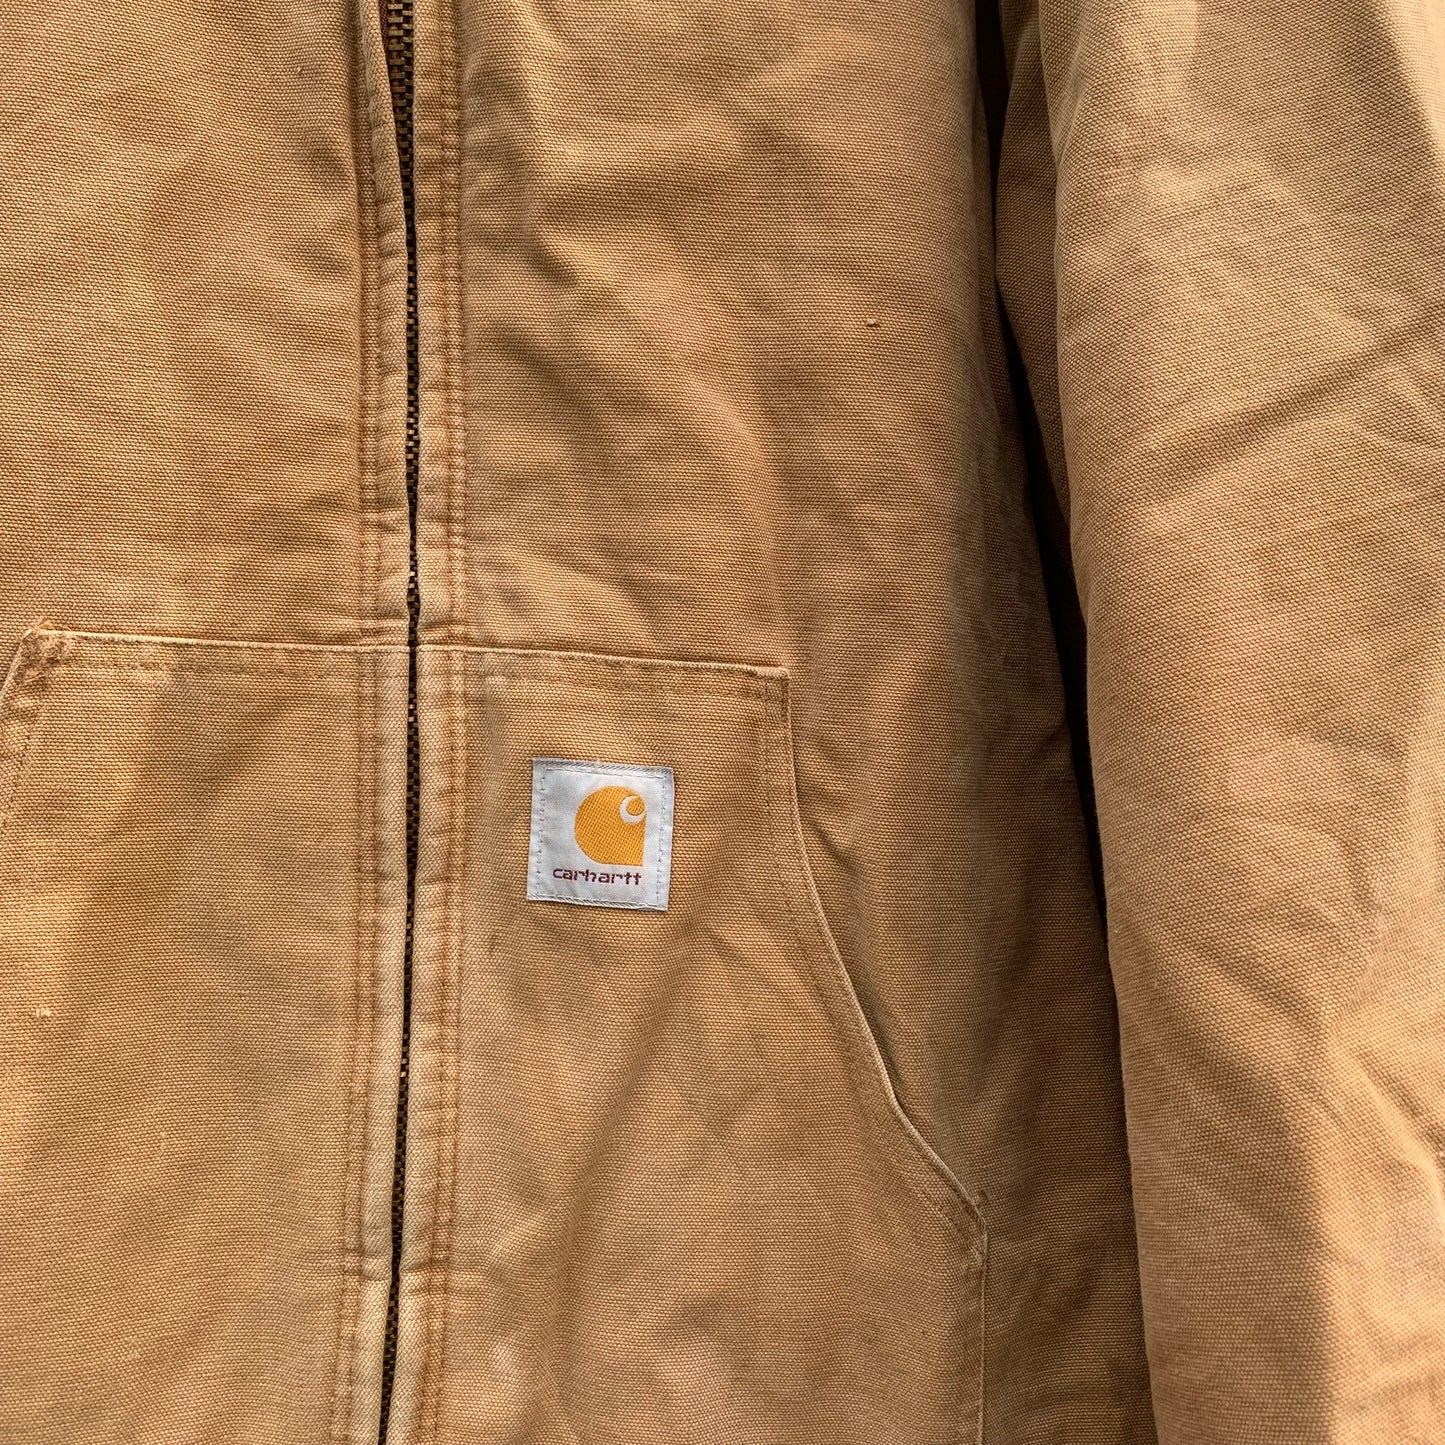 Carhartt Made in USA Brown Jacket